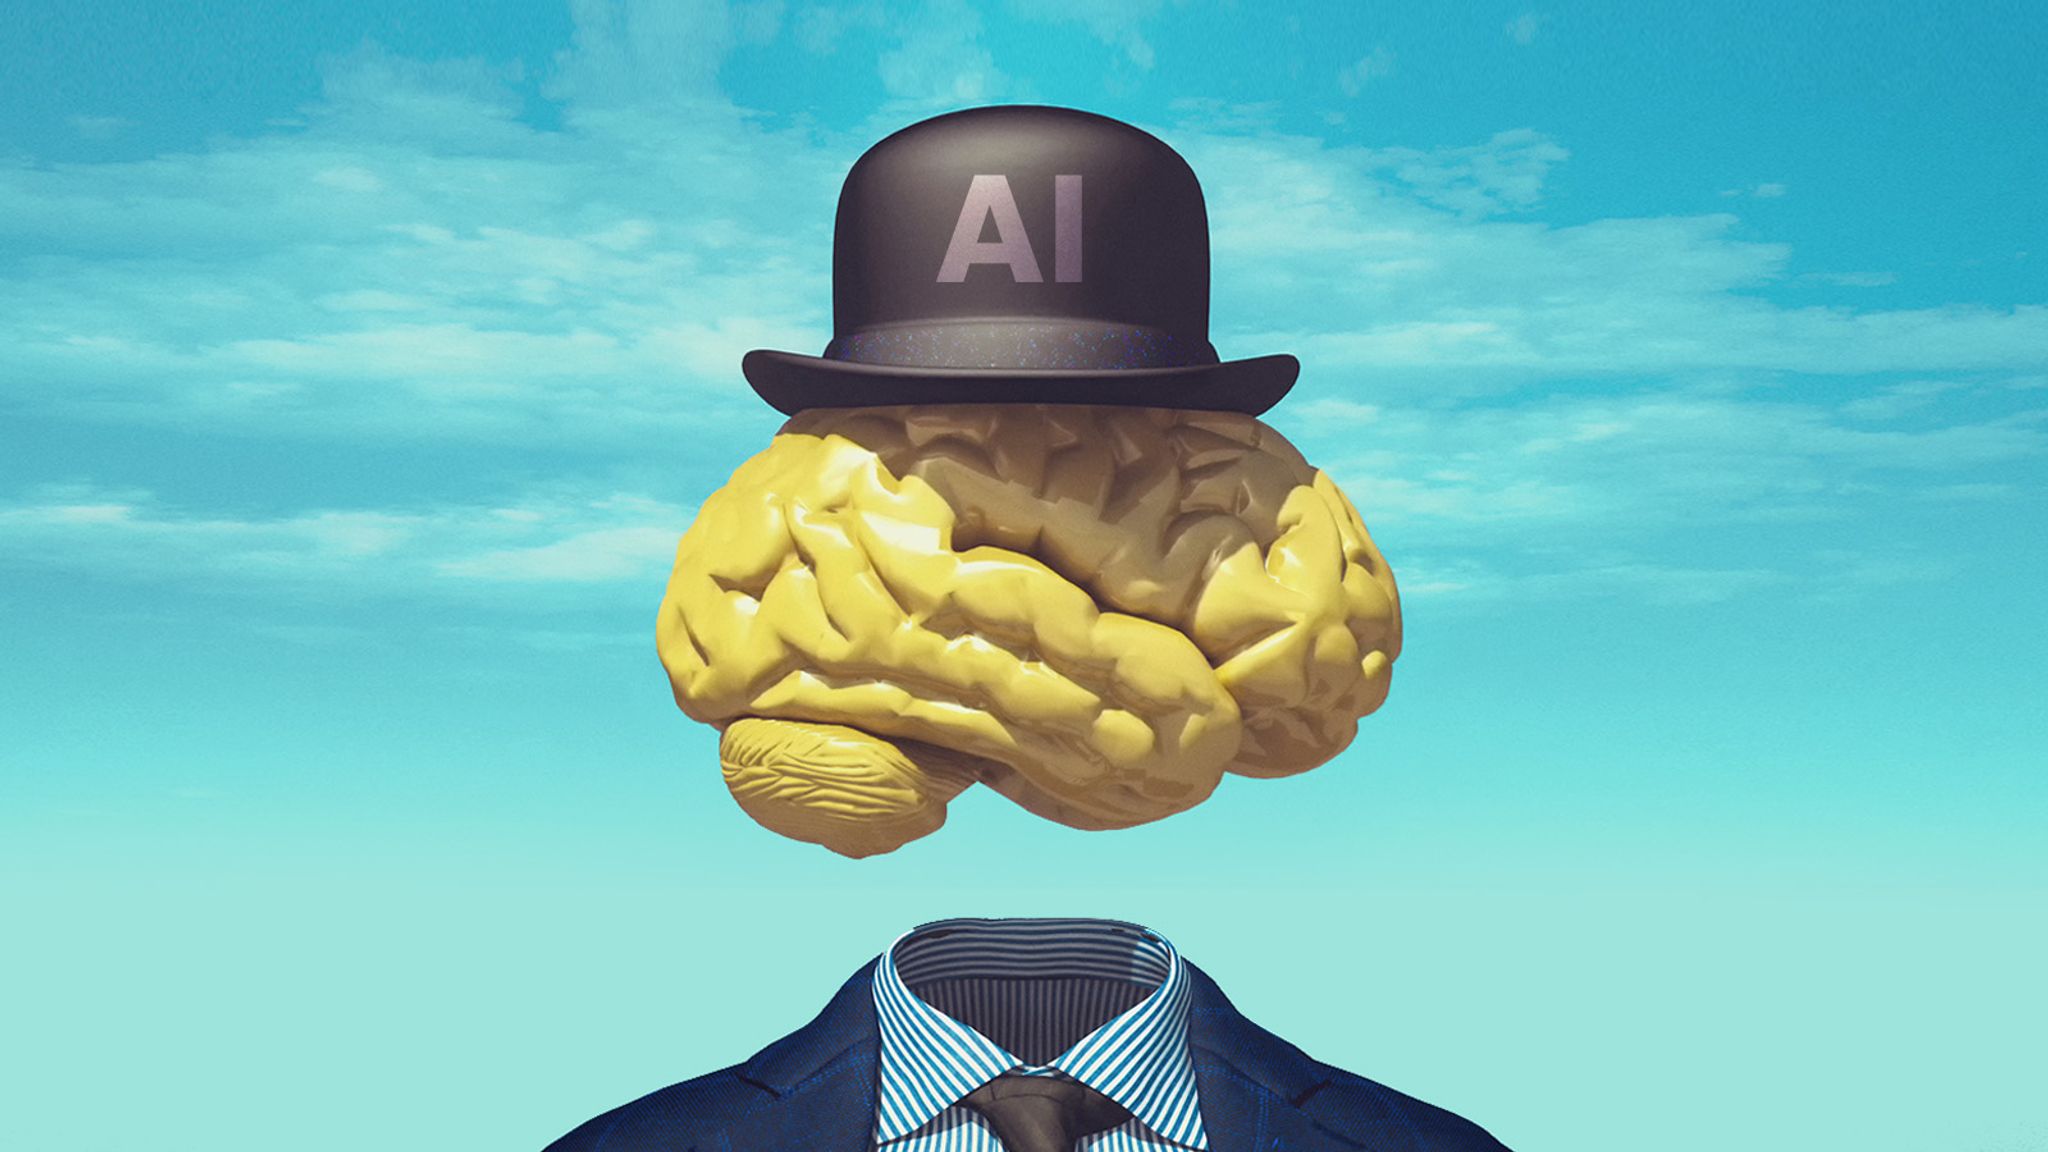 Image of a large, yellow brain with a bowler hat on top of it, with the letters "AI" printed on the hat. The brain and hat are floating above a man's torso, where the head should be - but is not there.